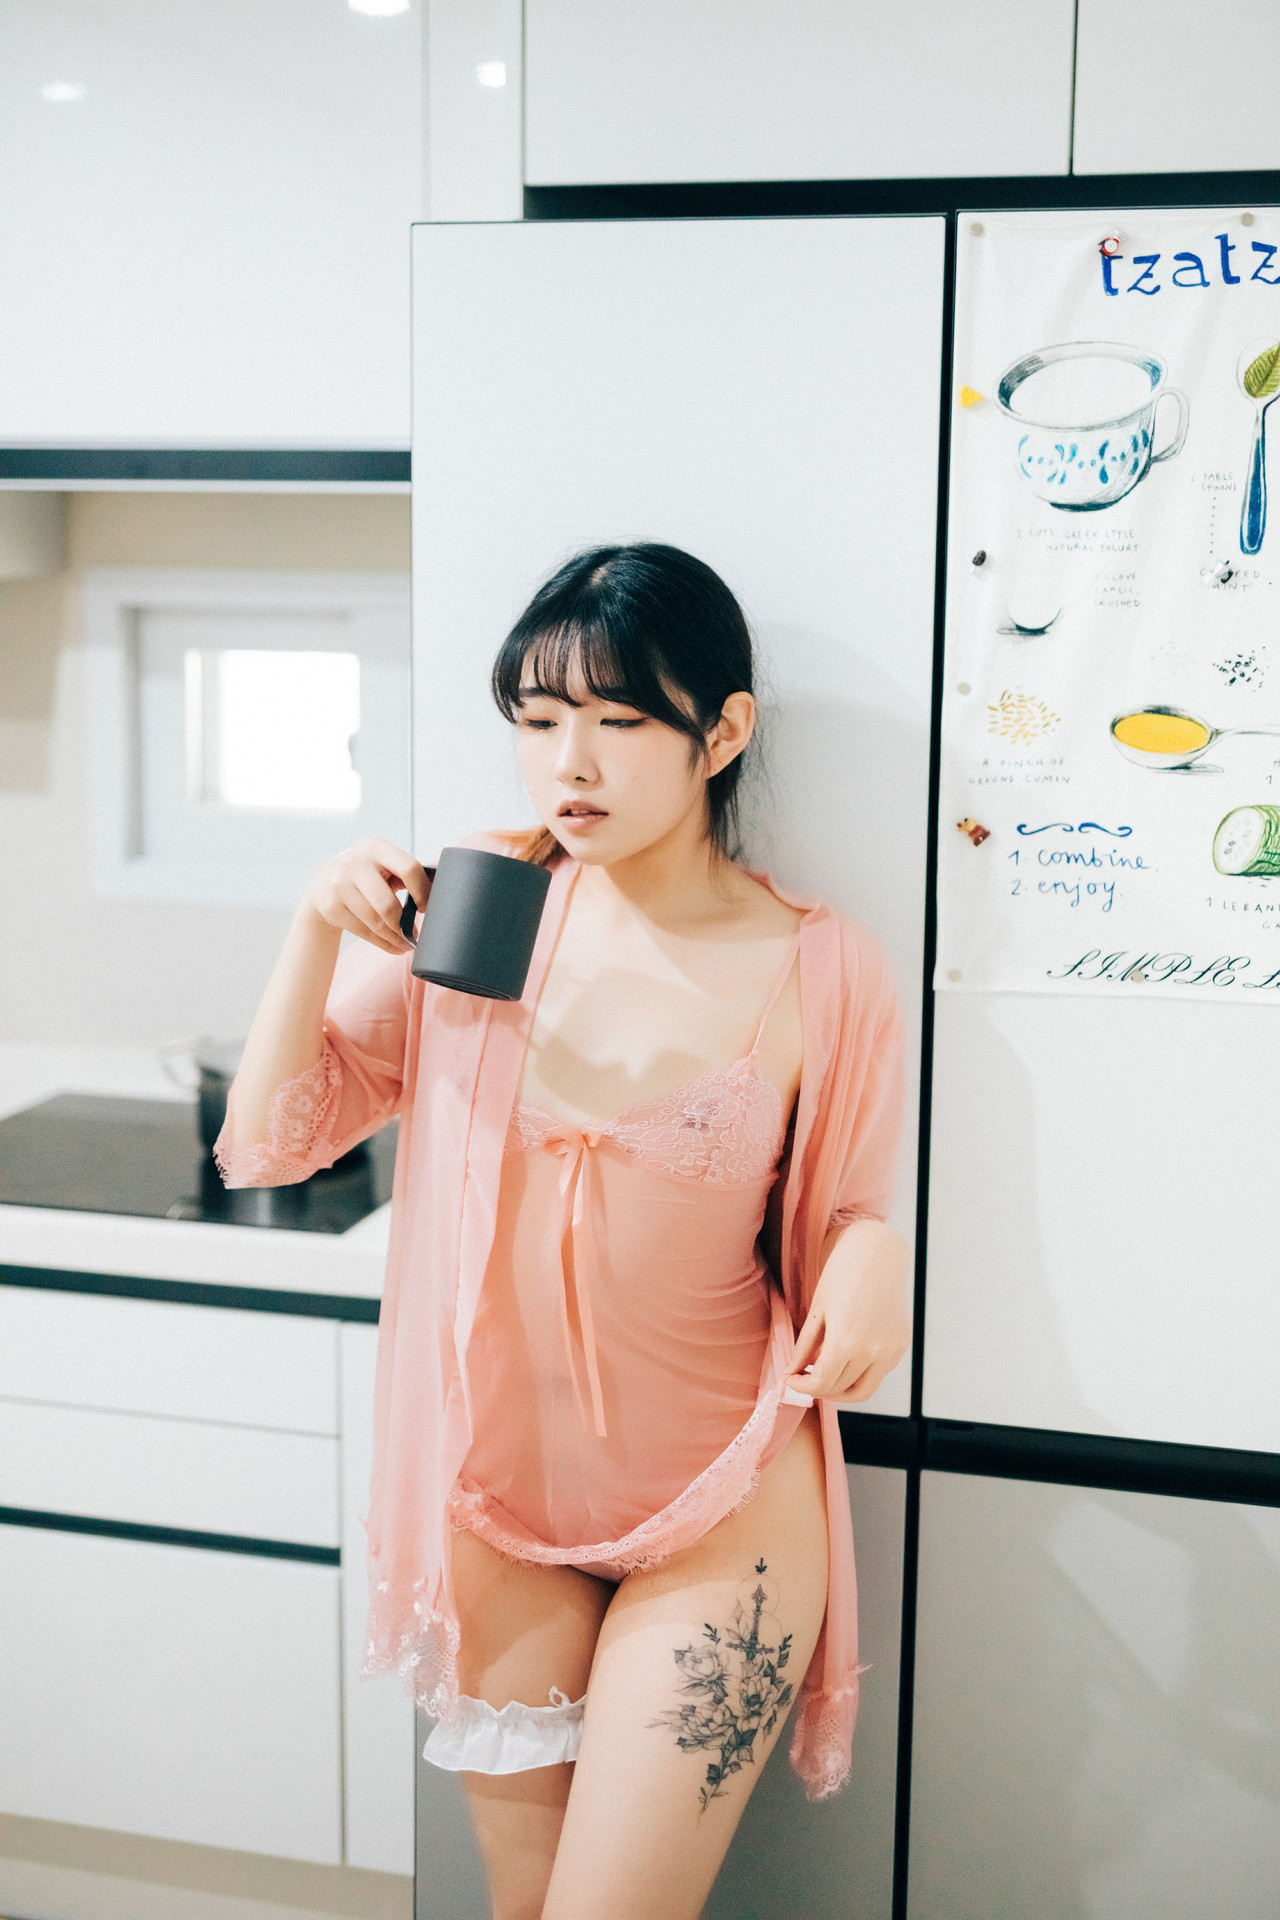 Sonson 손손, [Loozy] Date at home (+S Ver) Set.02(56)